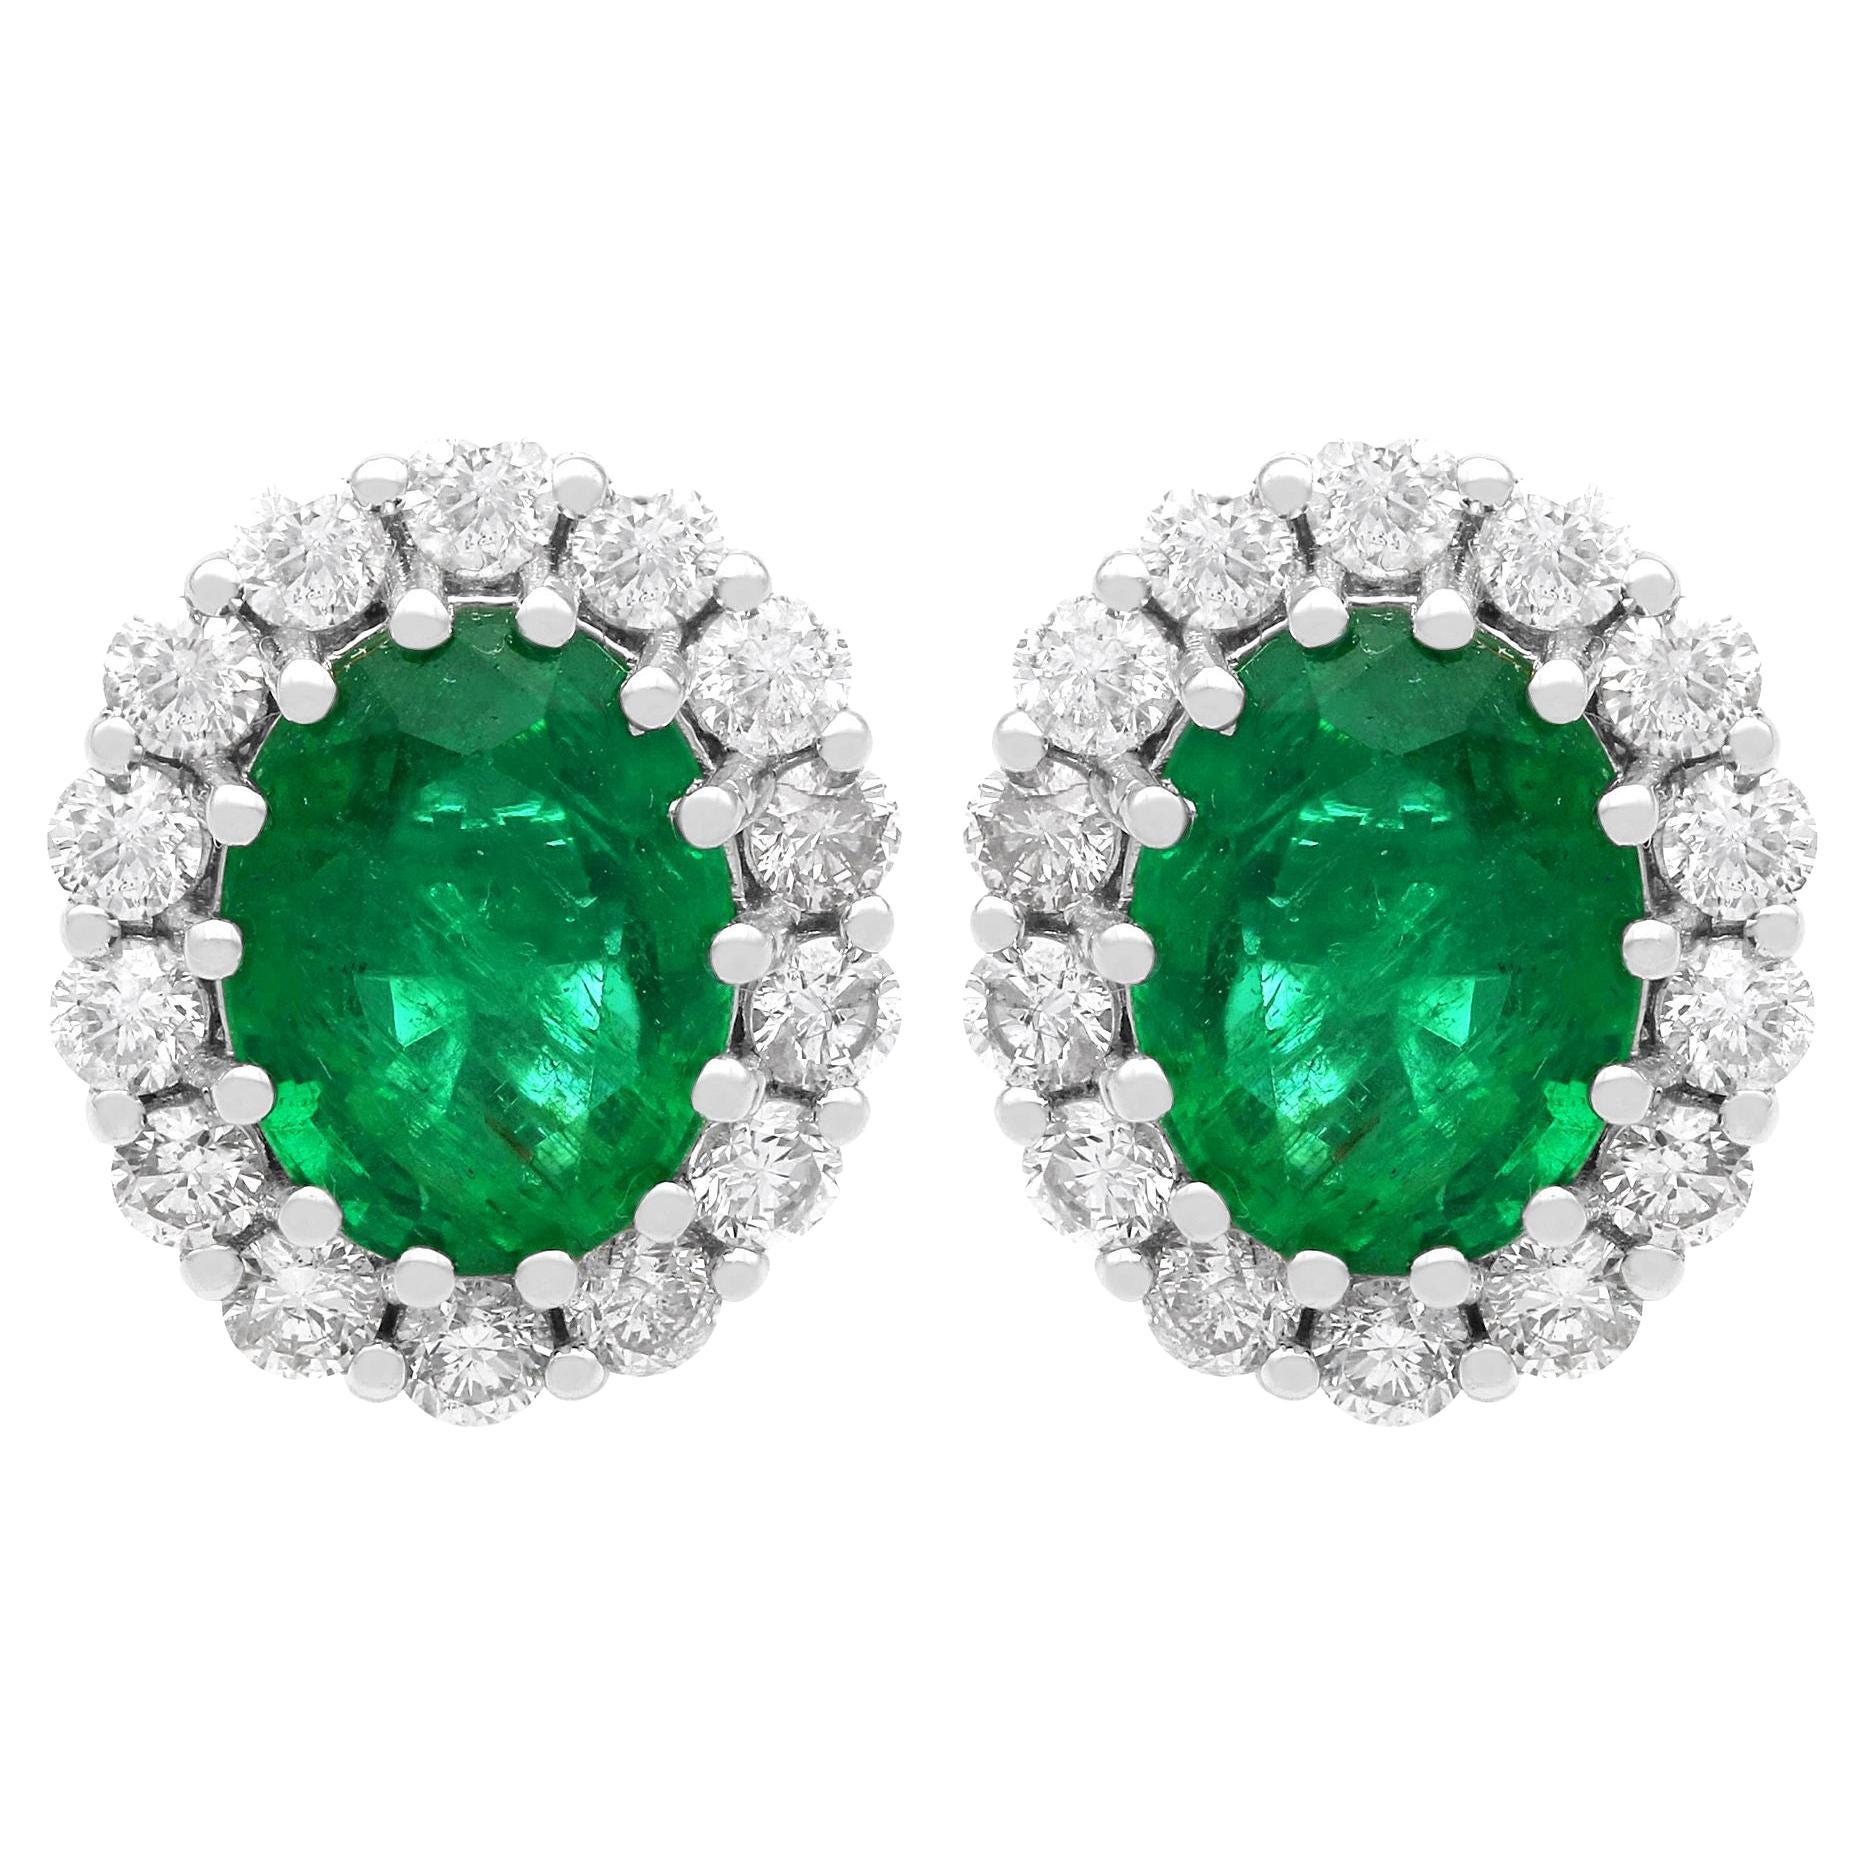 Vintage 3.50ct Emerald and 0.70ct Diamond Cluster Earrings in 18ct White Gold